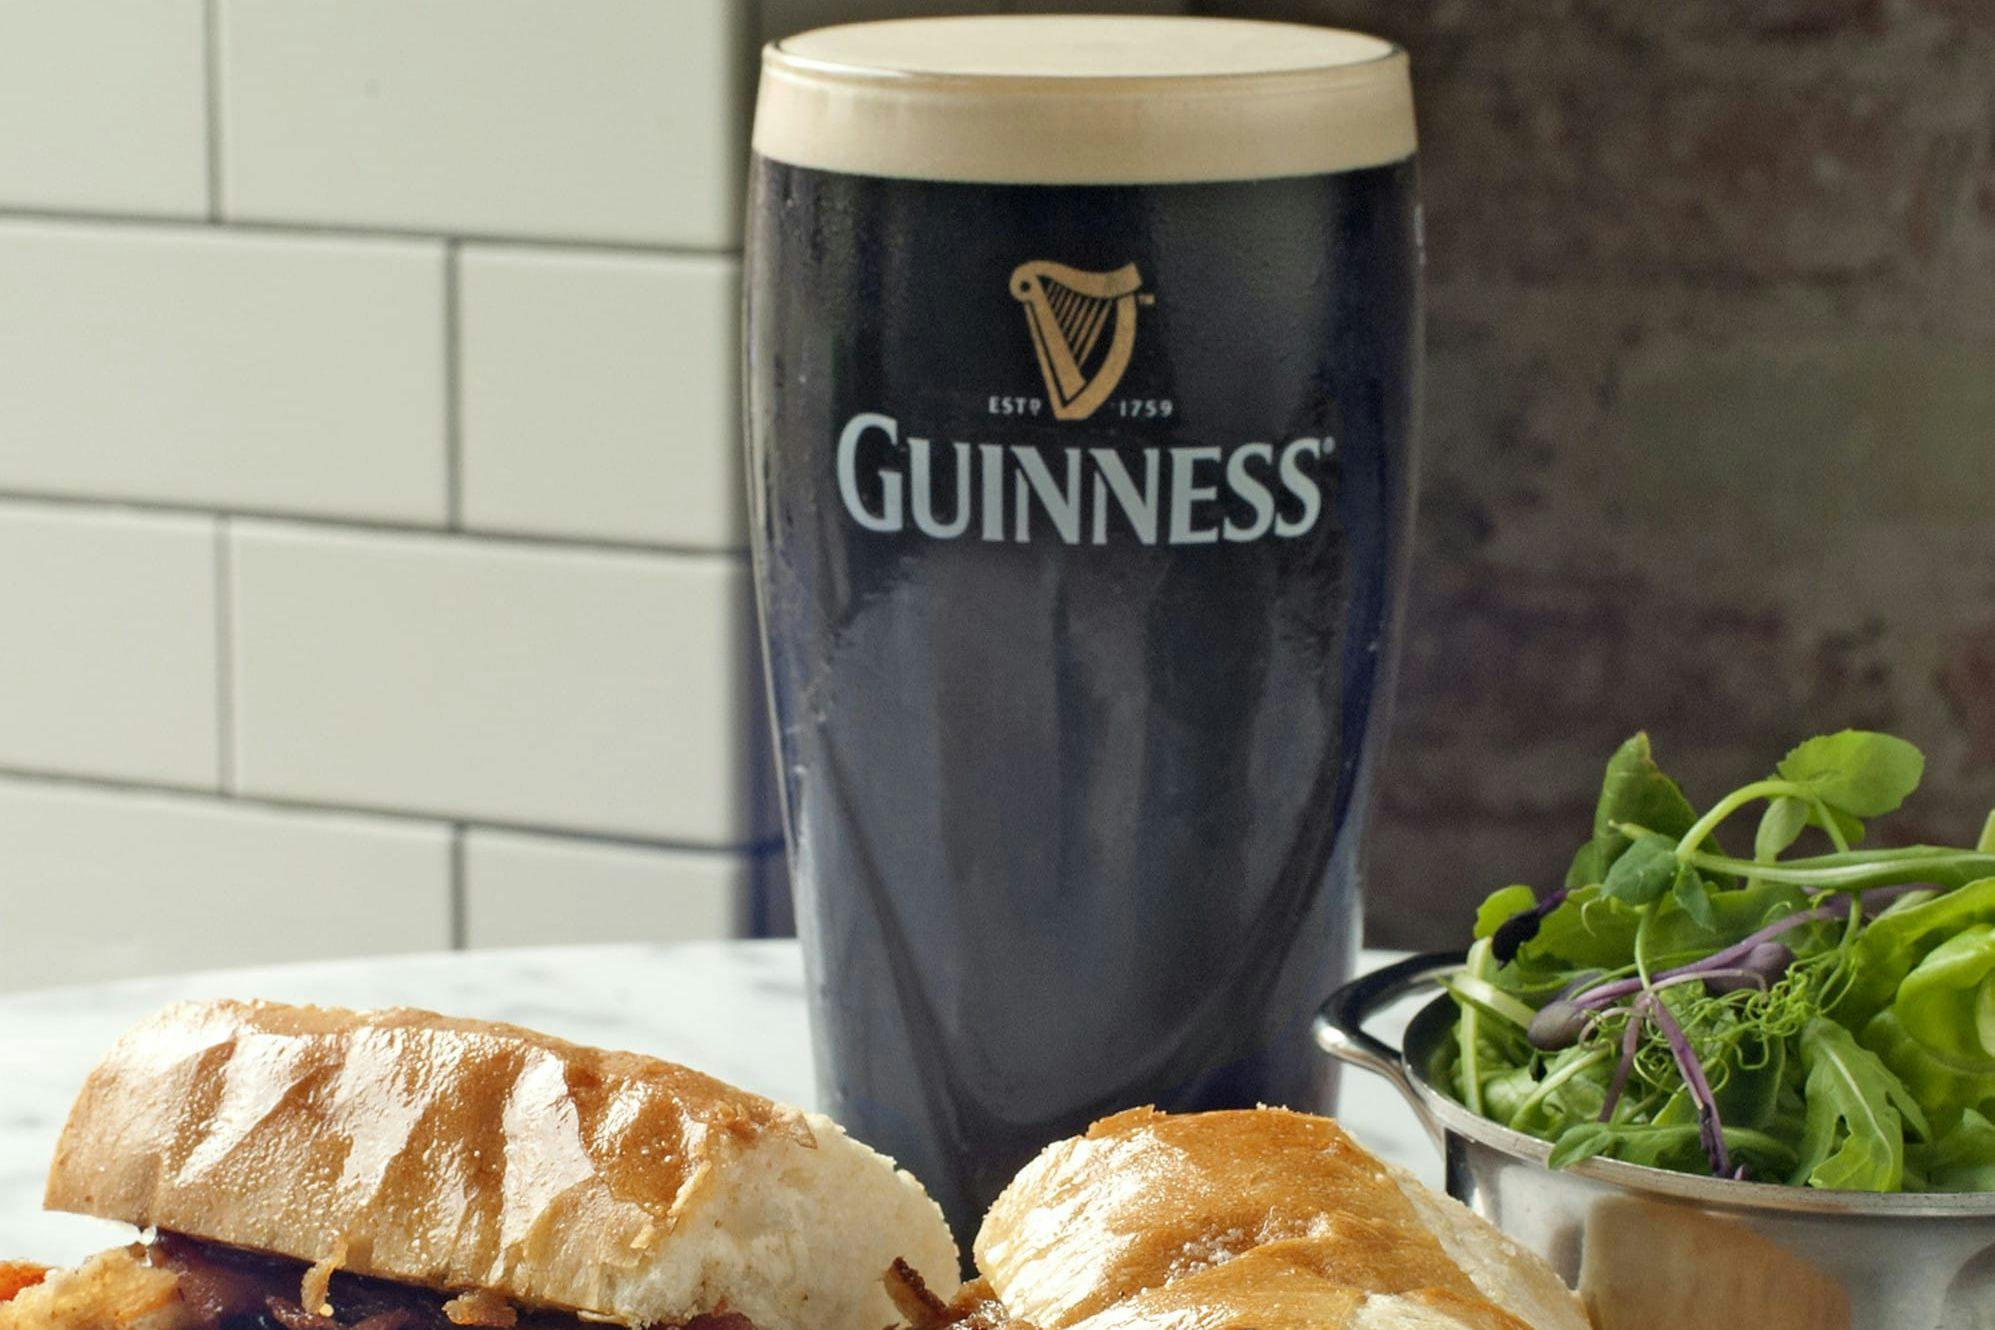 brie sandwich with a pint of Guinness